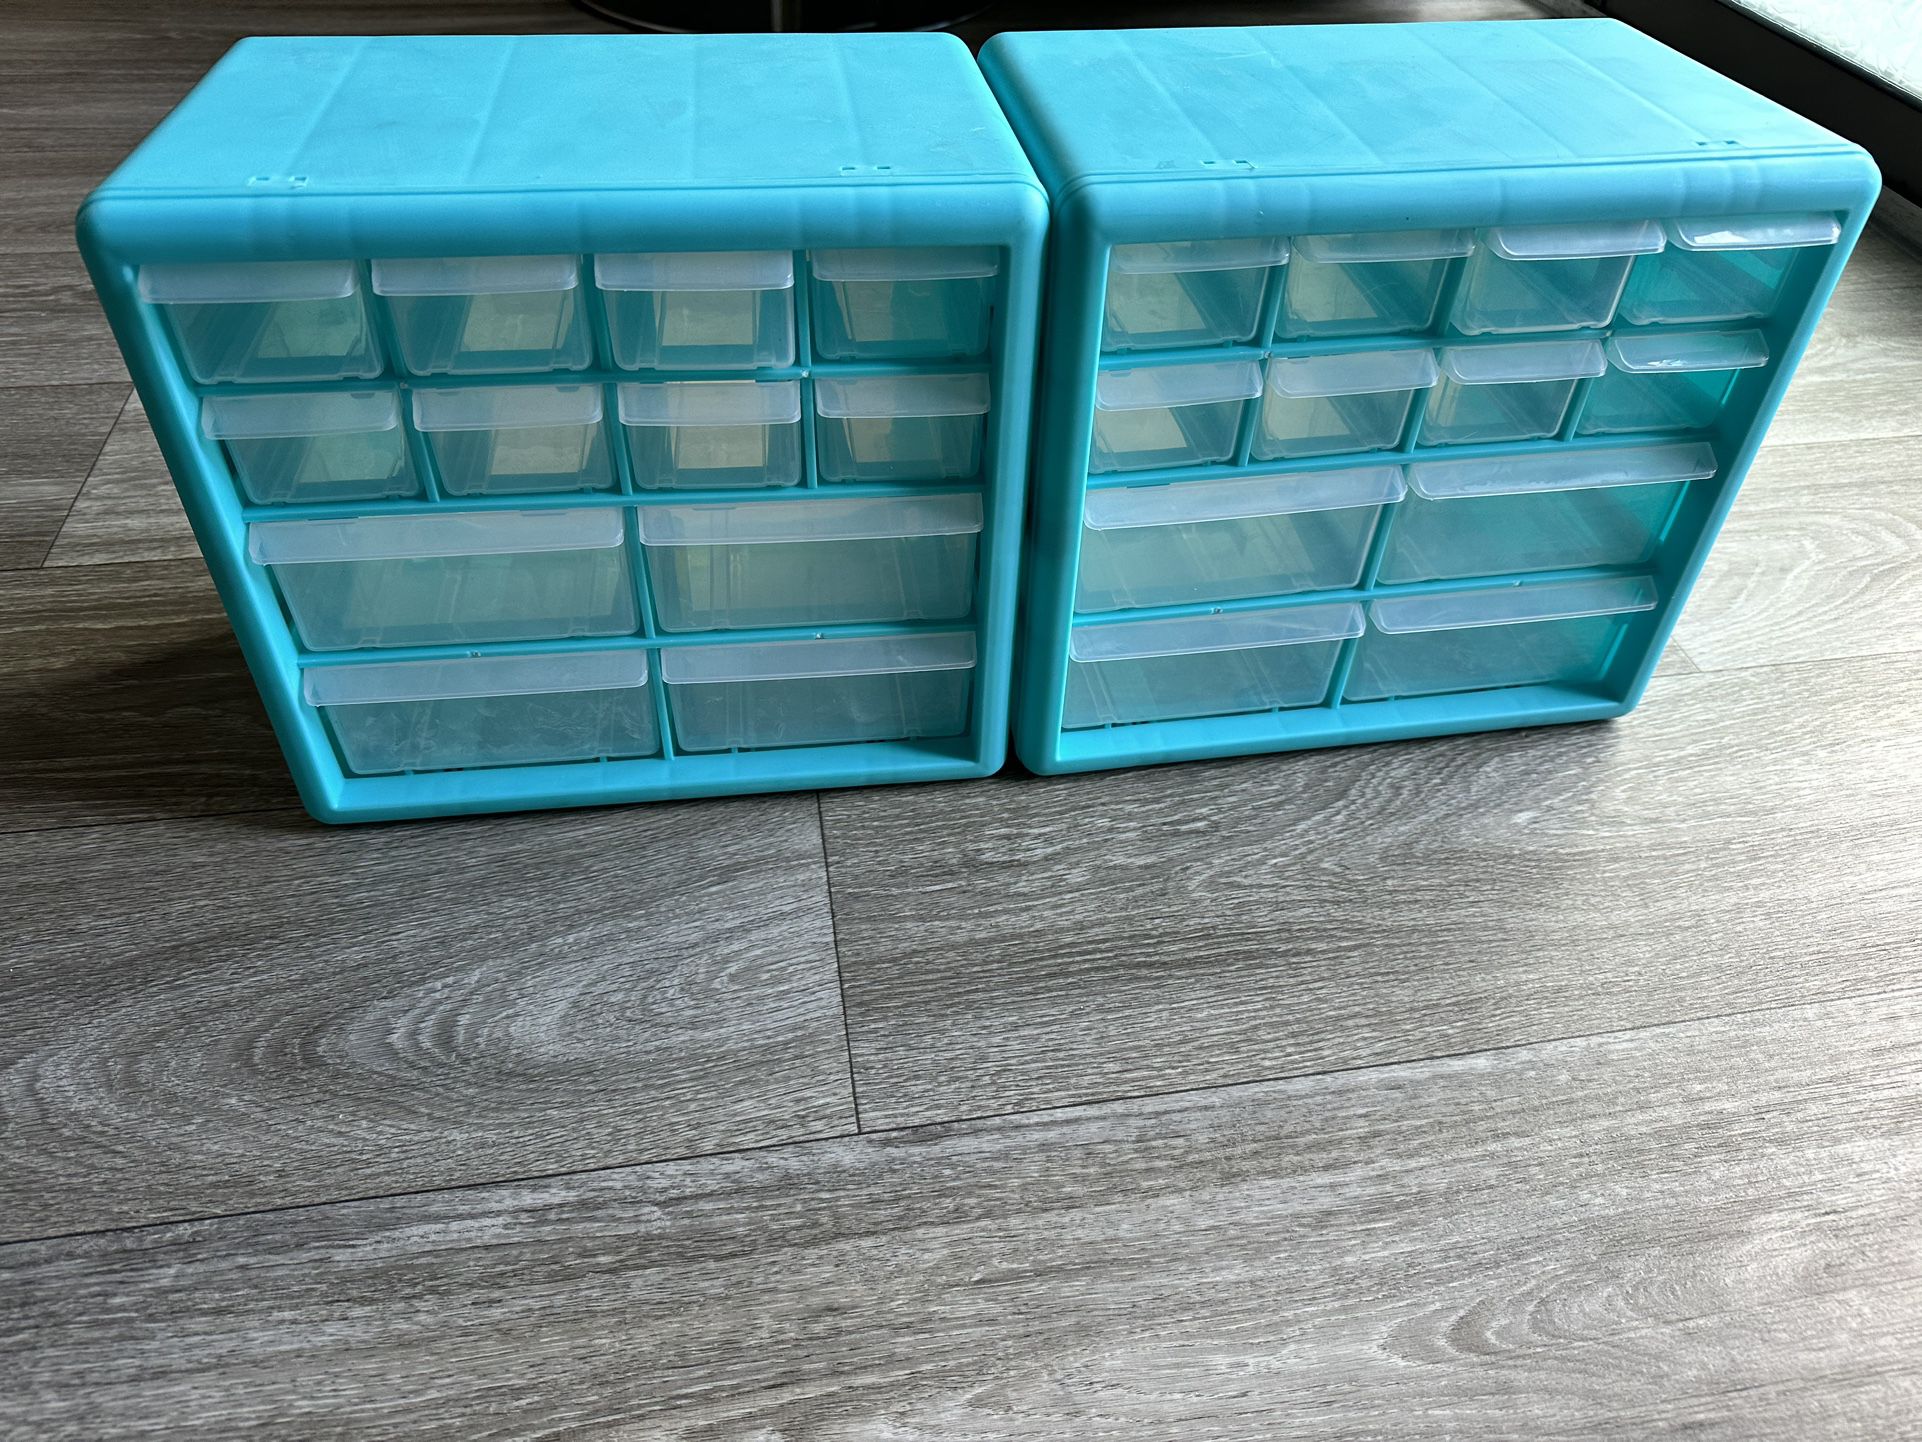 2 Organizer Boxes With Drawers